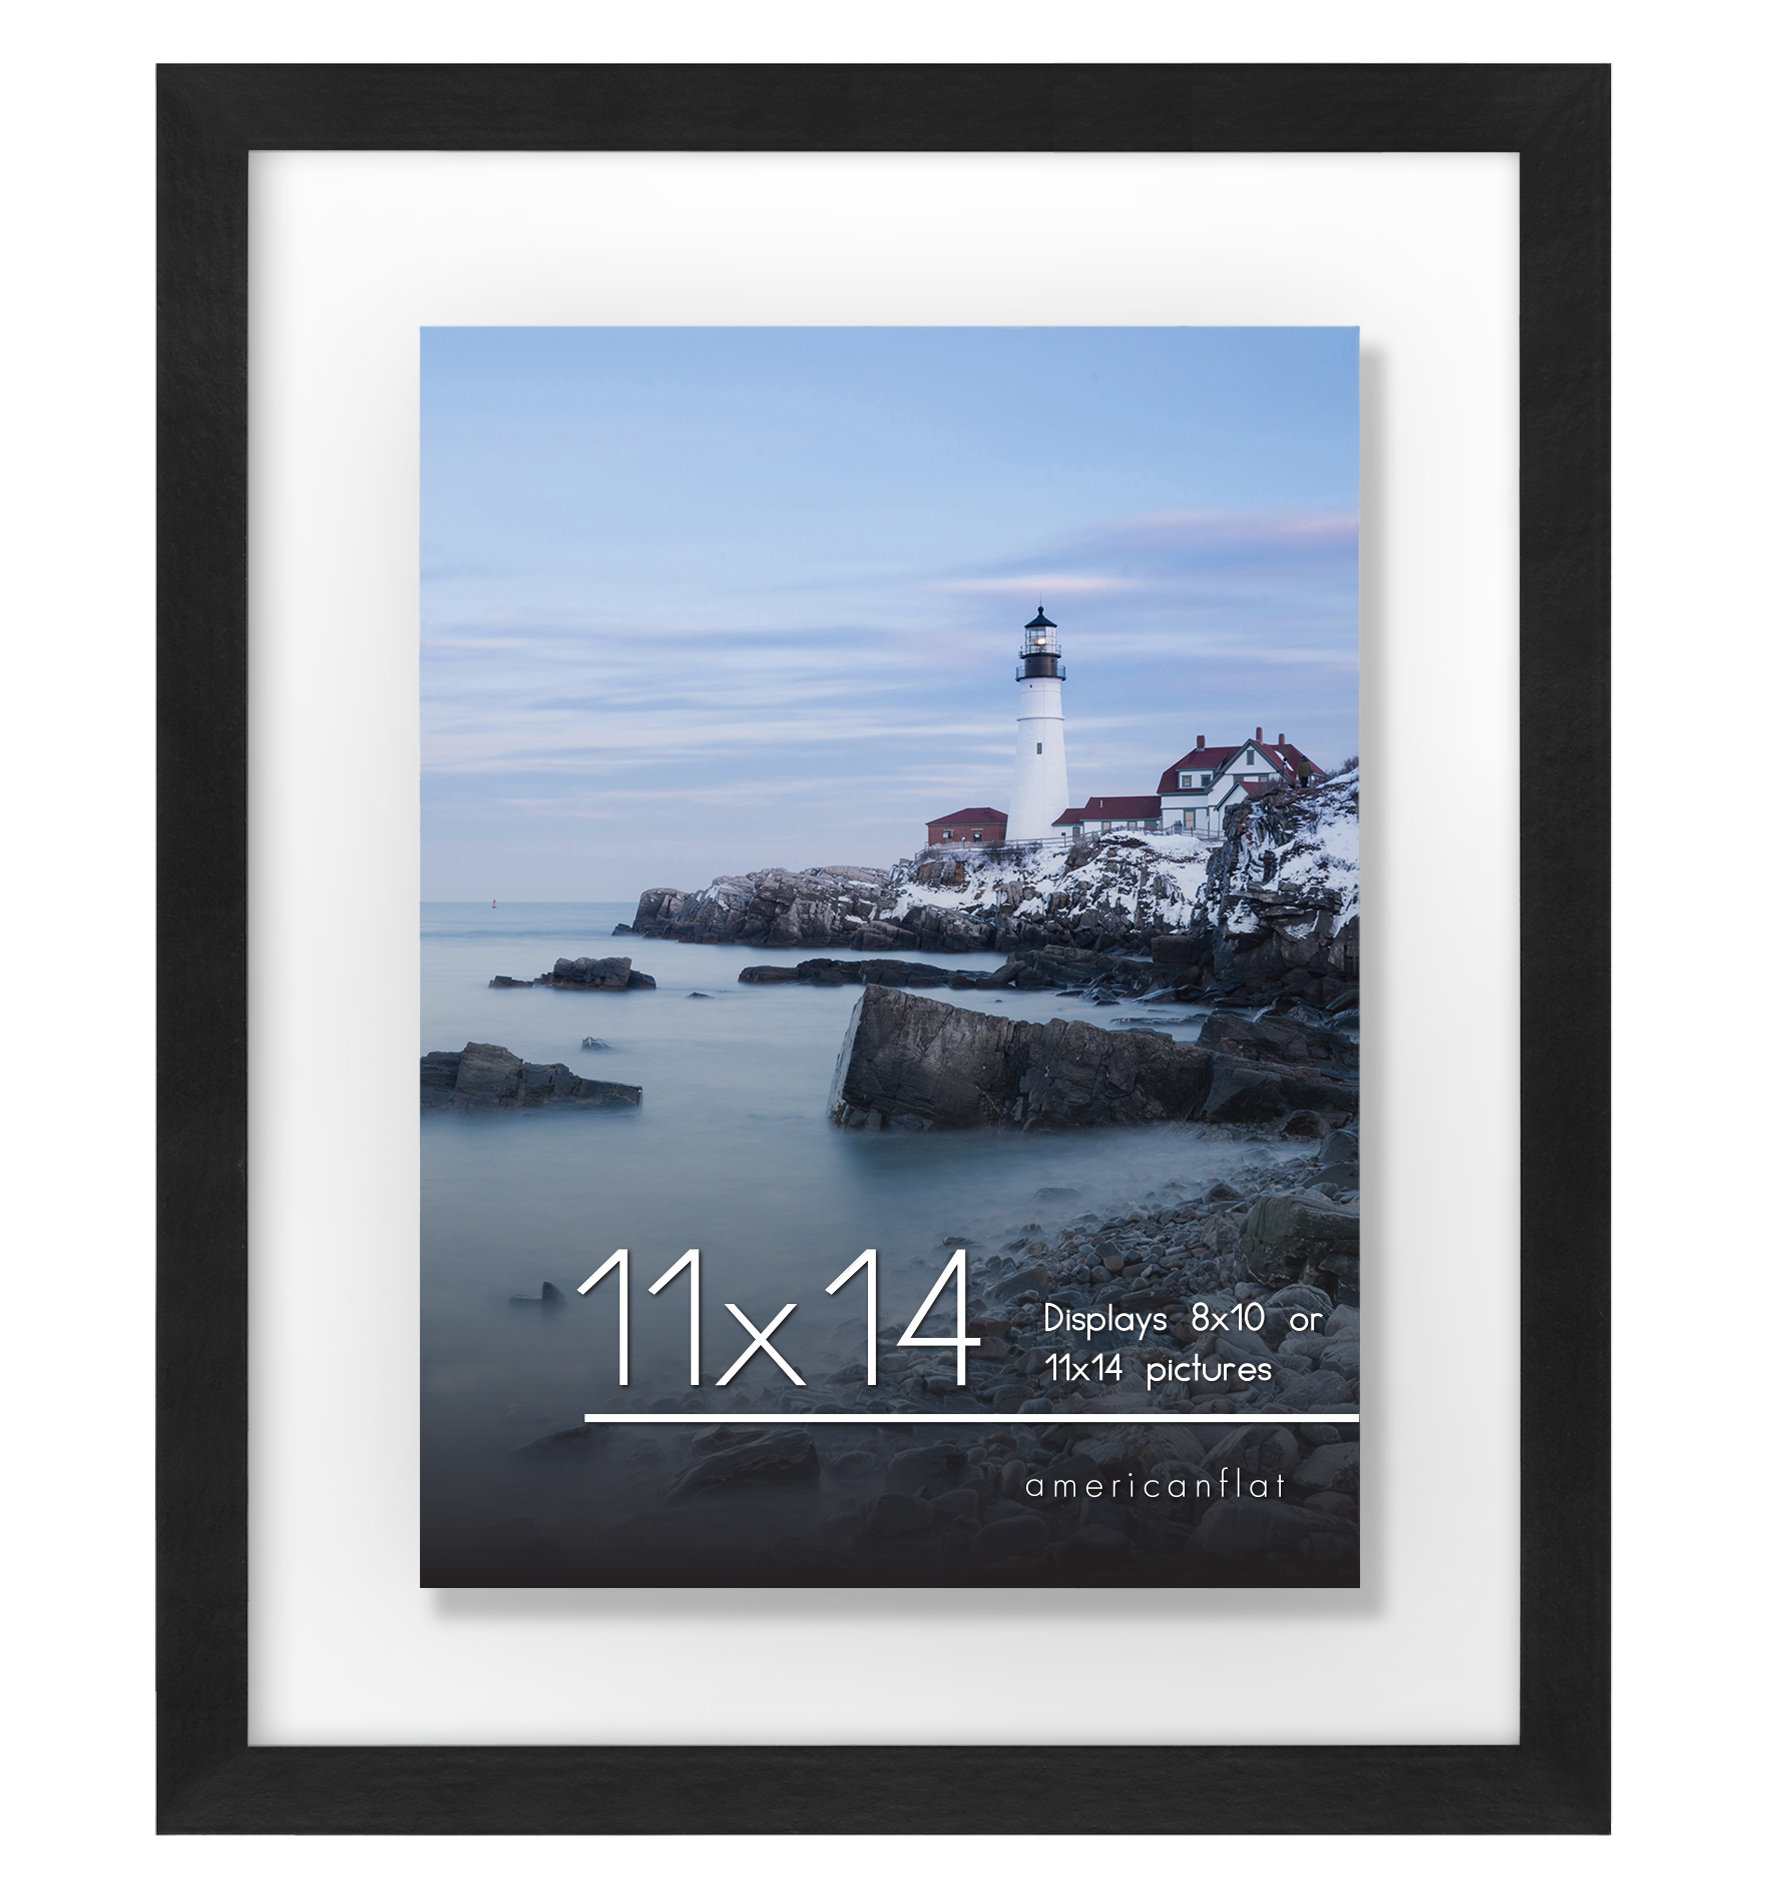 Snap 16x20 Float Frame For Floating Display of 11x14 Image, White 